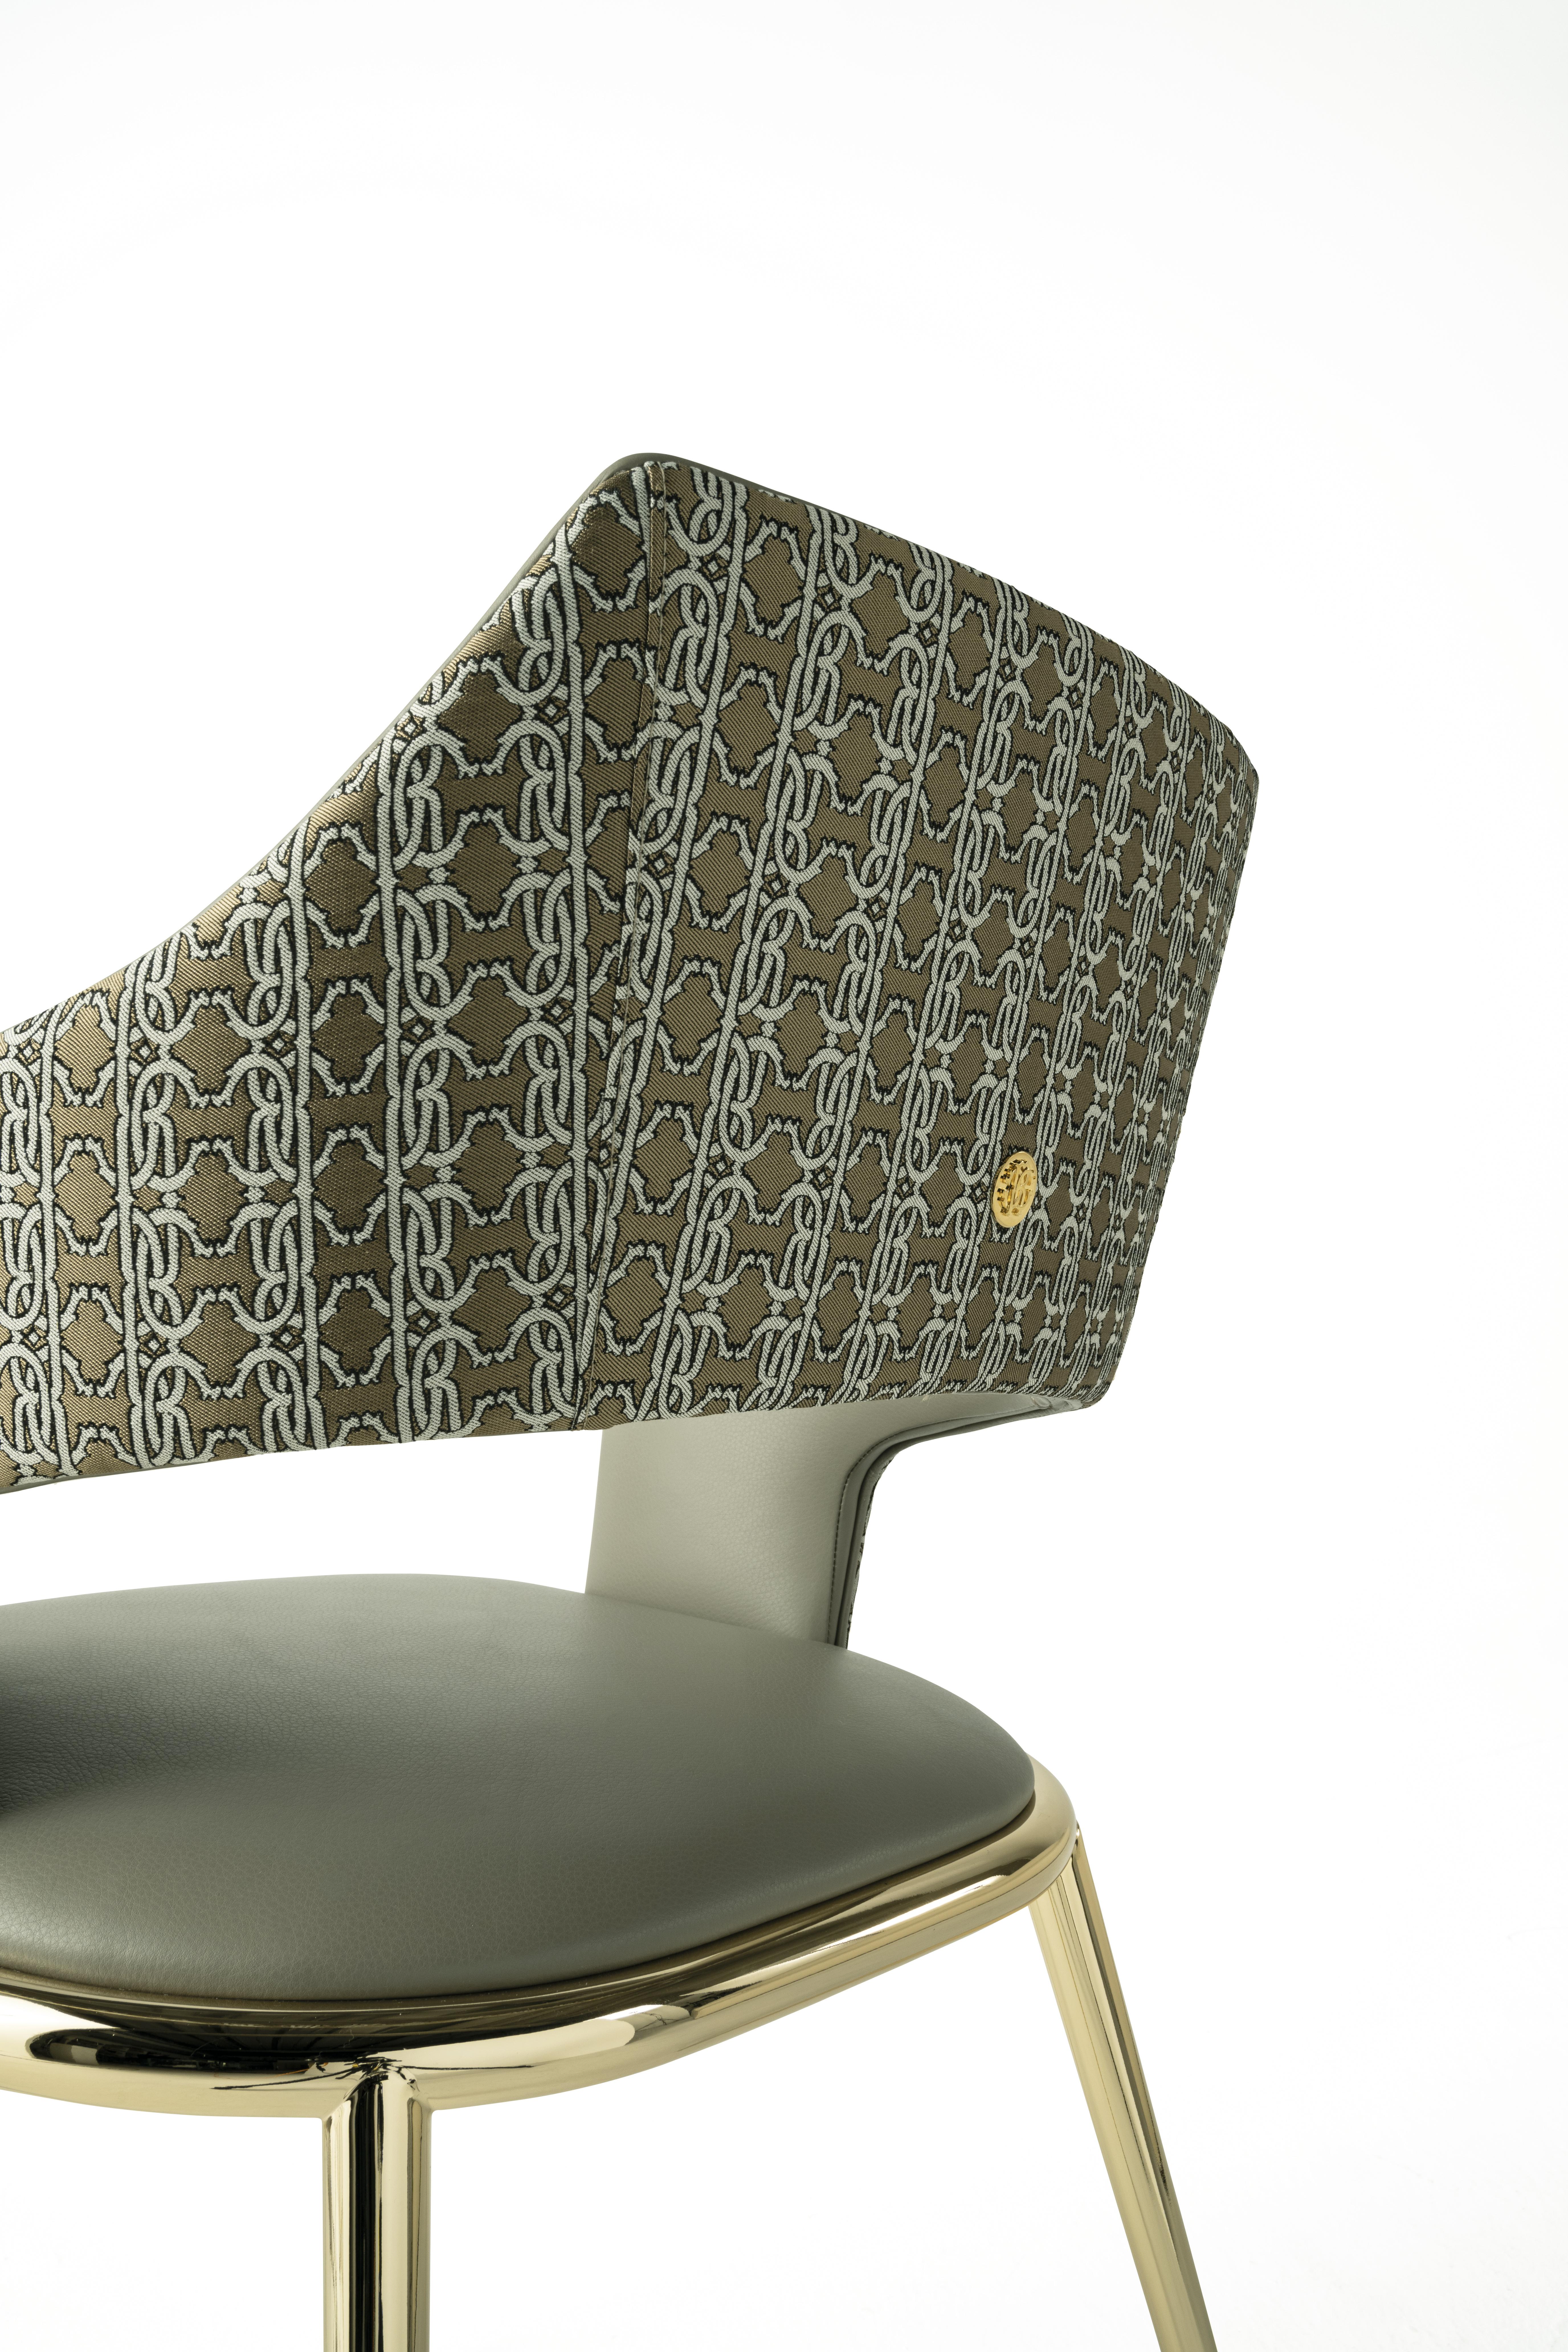 Metal 21st Century Shira Chair in Leather by Roberto Cavalli Home Interiors For Sale